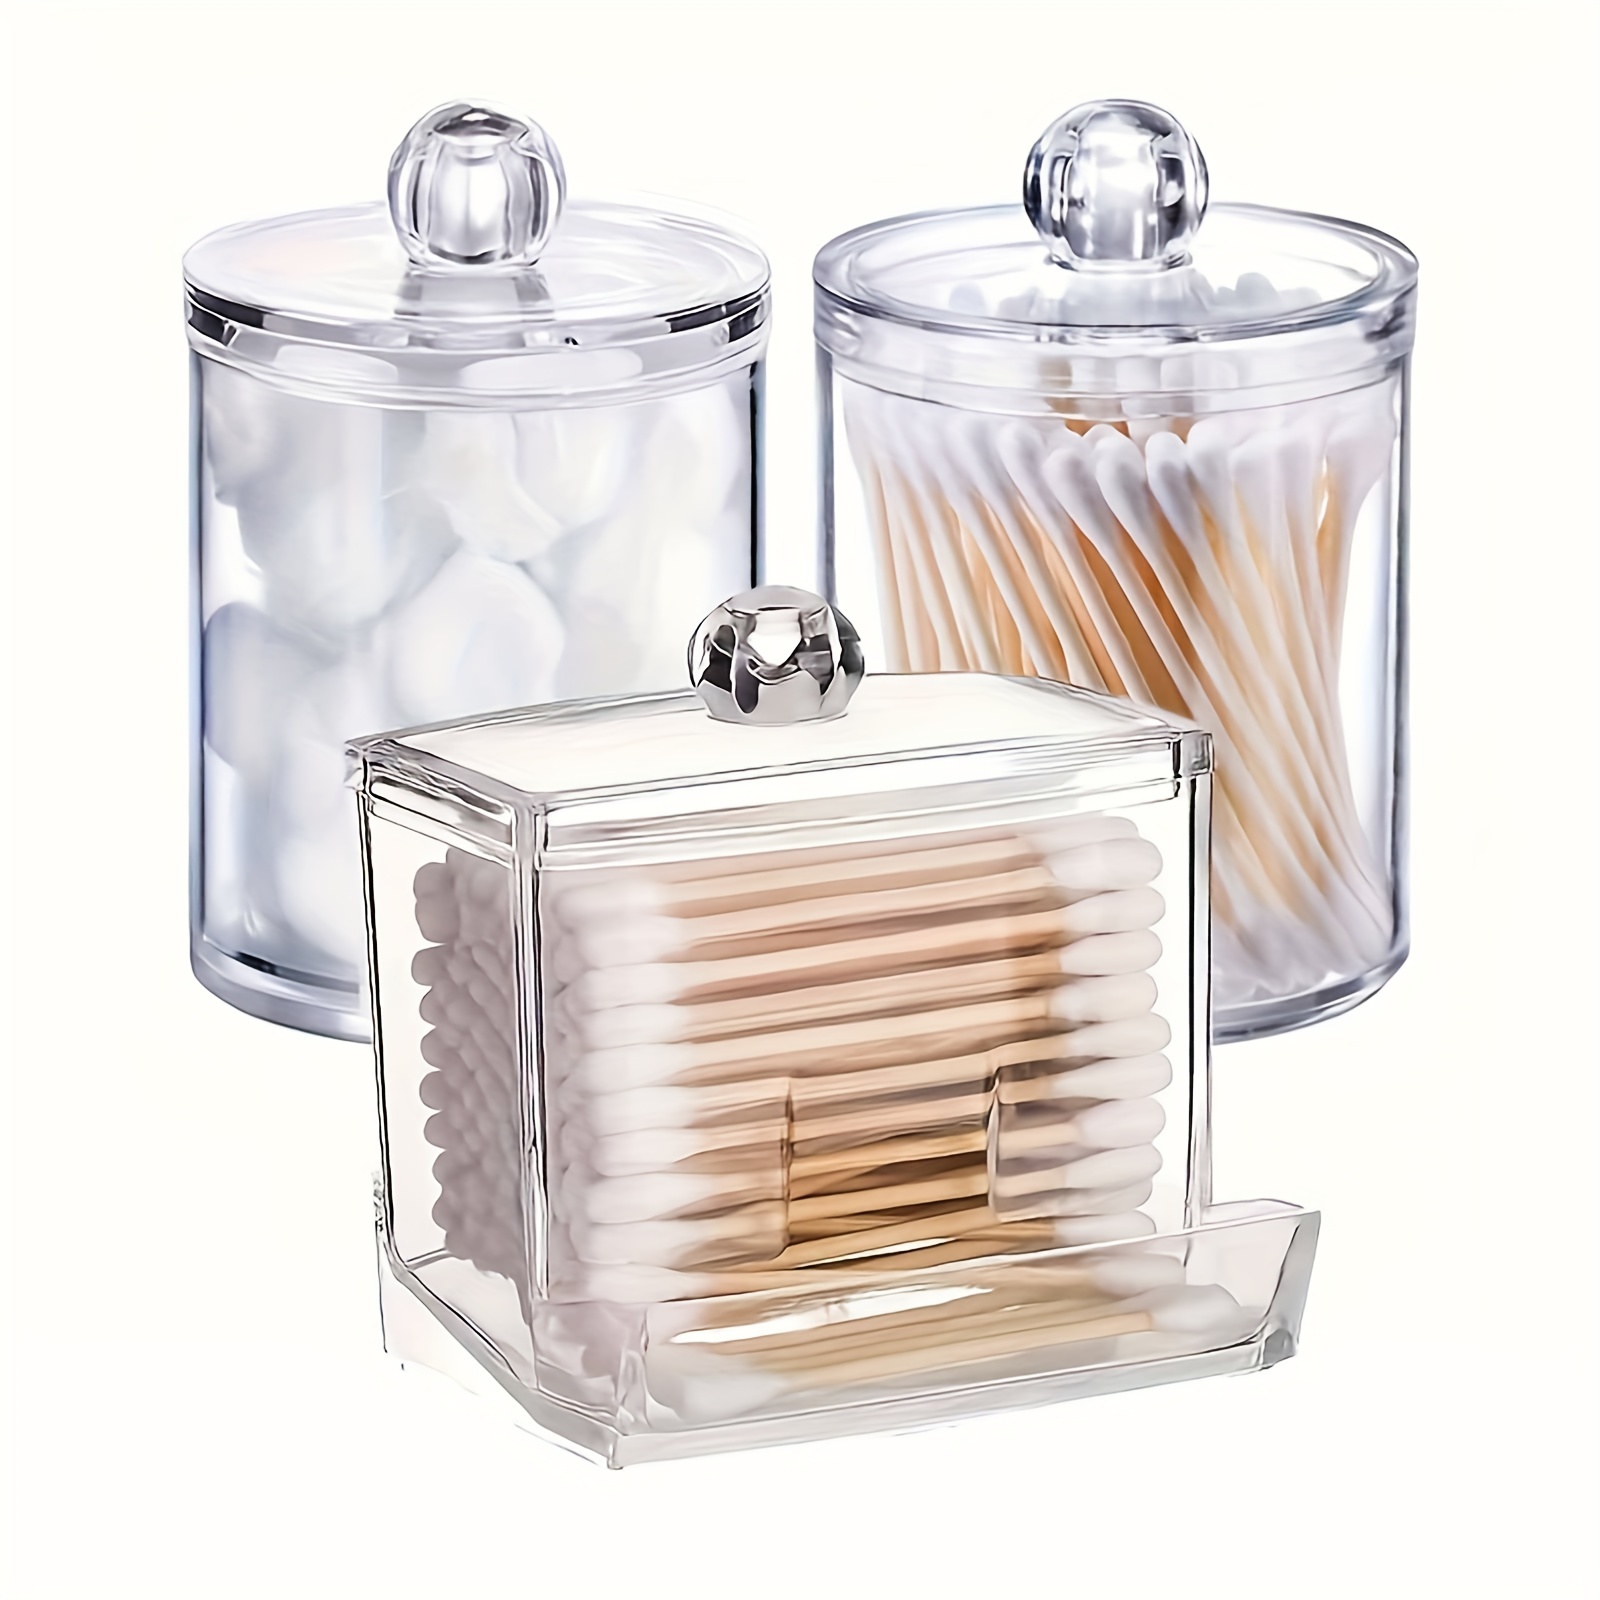 

3-piece Acrylic Dispenser Jars With Brackets - Clear Plastic Storage Containers For Cotton Balls, Swabs & Rounds - Perfect For Bathroom Organization